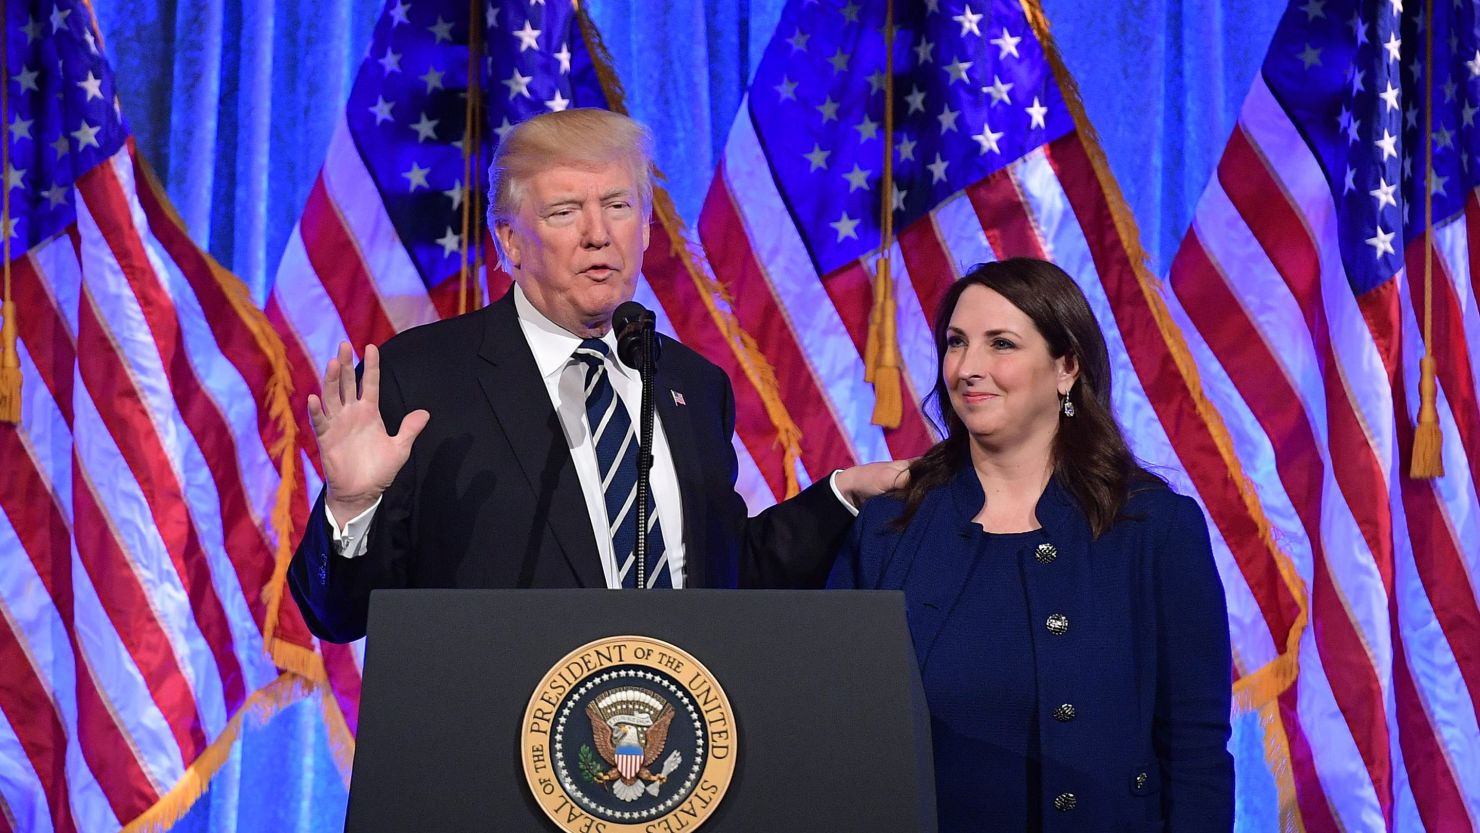 Then-President Donald Trump speaks after his introduction by RNC Chair Ronna McDaniel at fundraiser in New York on December 2, 2017. 